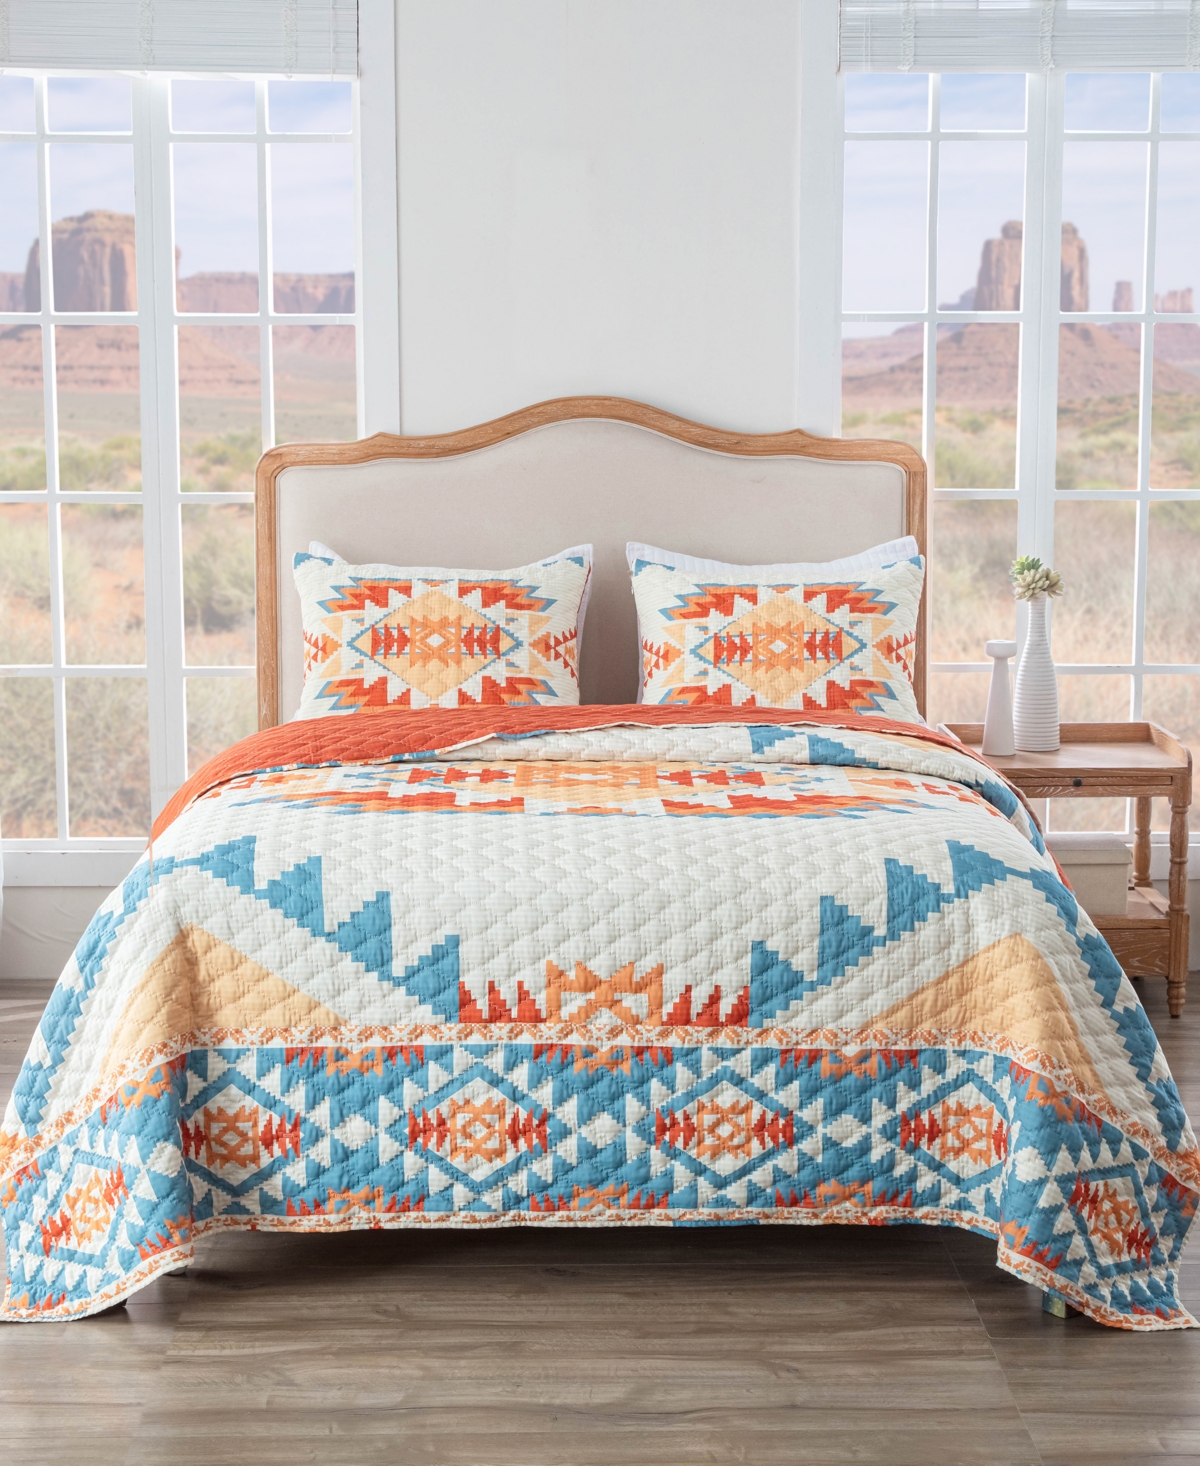 Greenland Home Fashions Horizon Southwestern Native 3 Piece Quilt Set, King/california King In Sunset